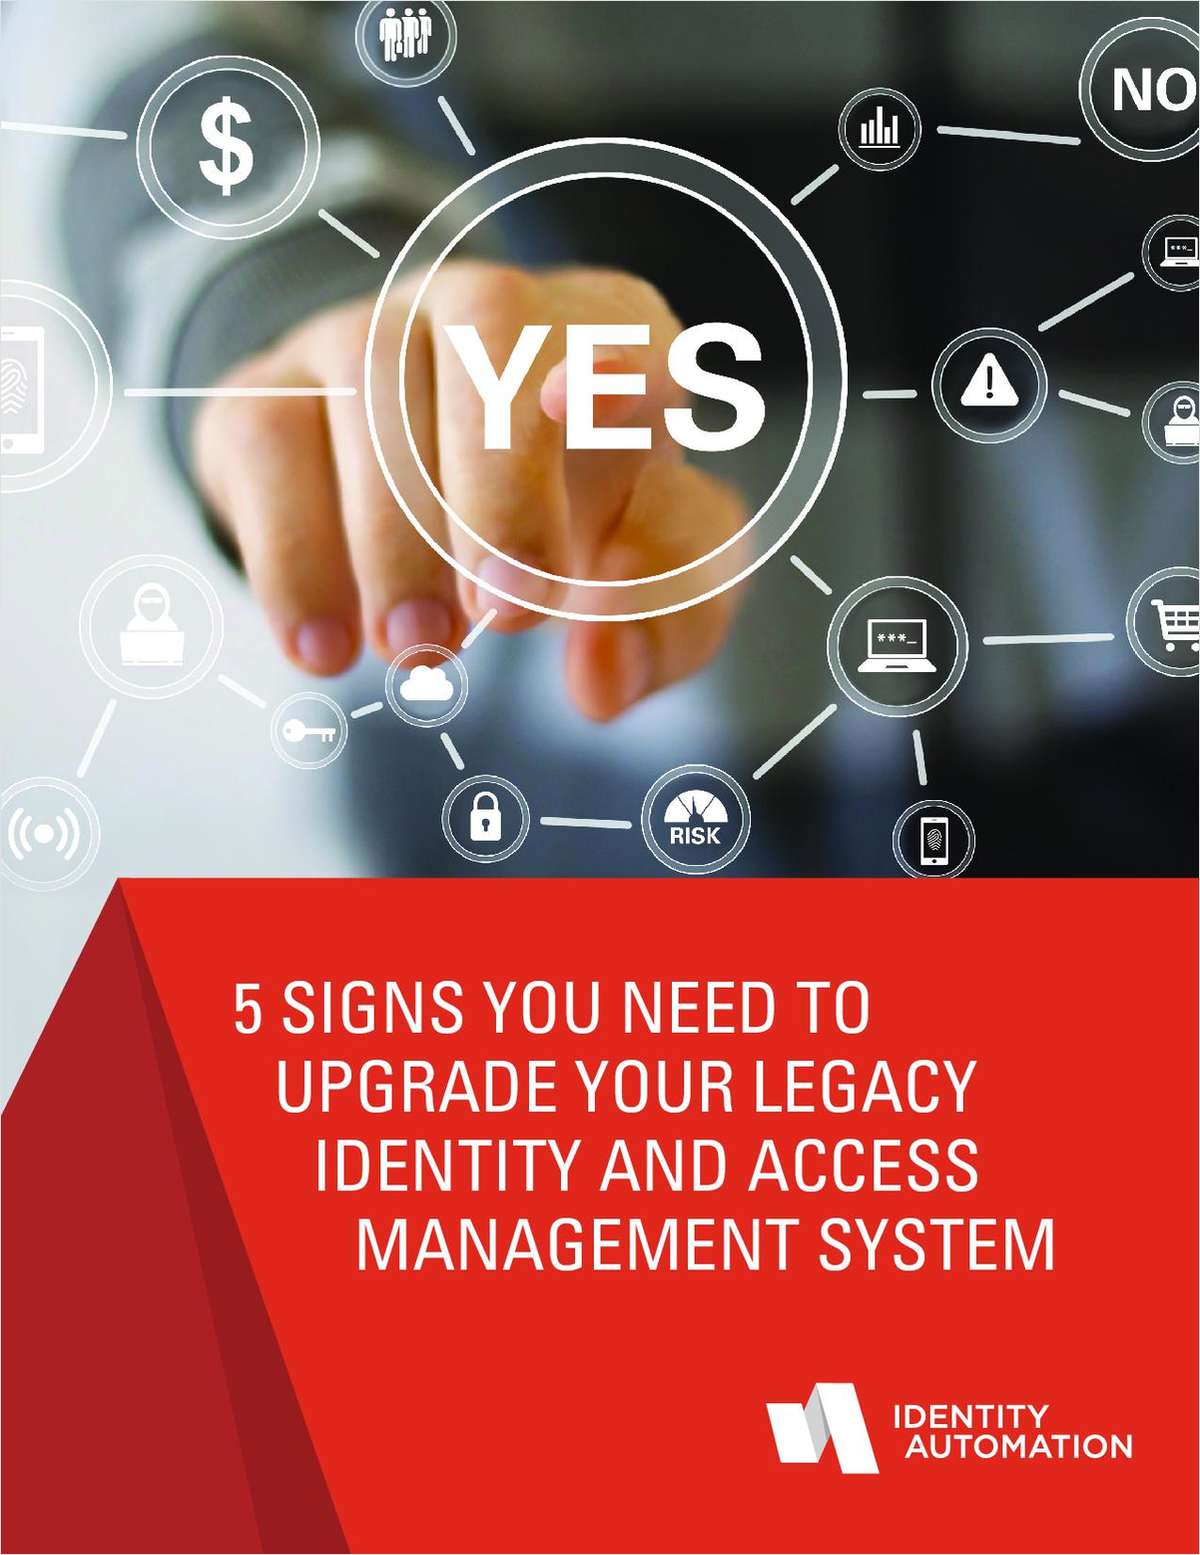 5 Signs You Need to Upgrade Your Legacy Identity and Access Management System